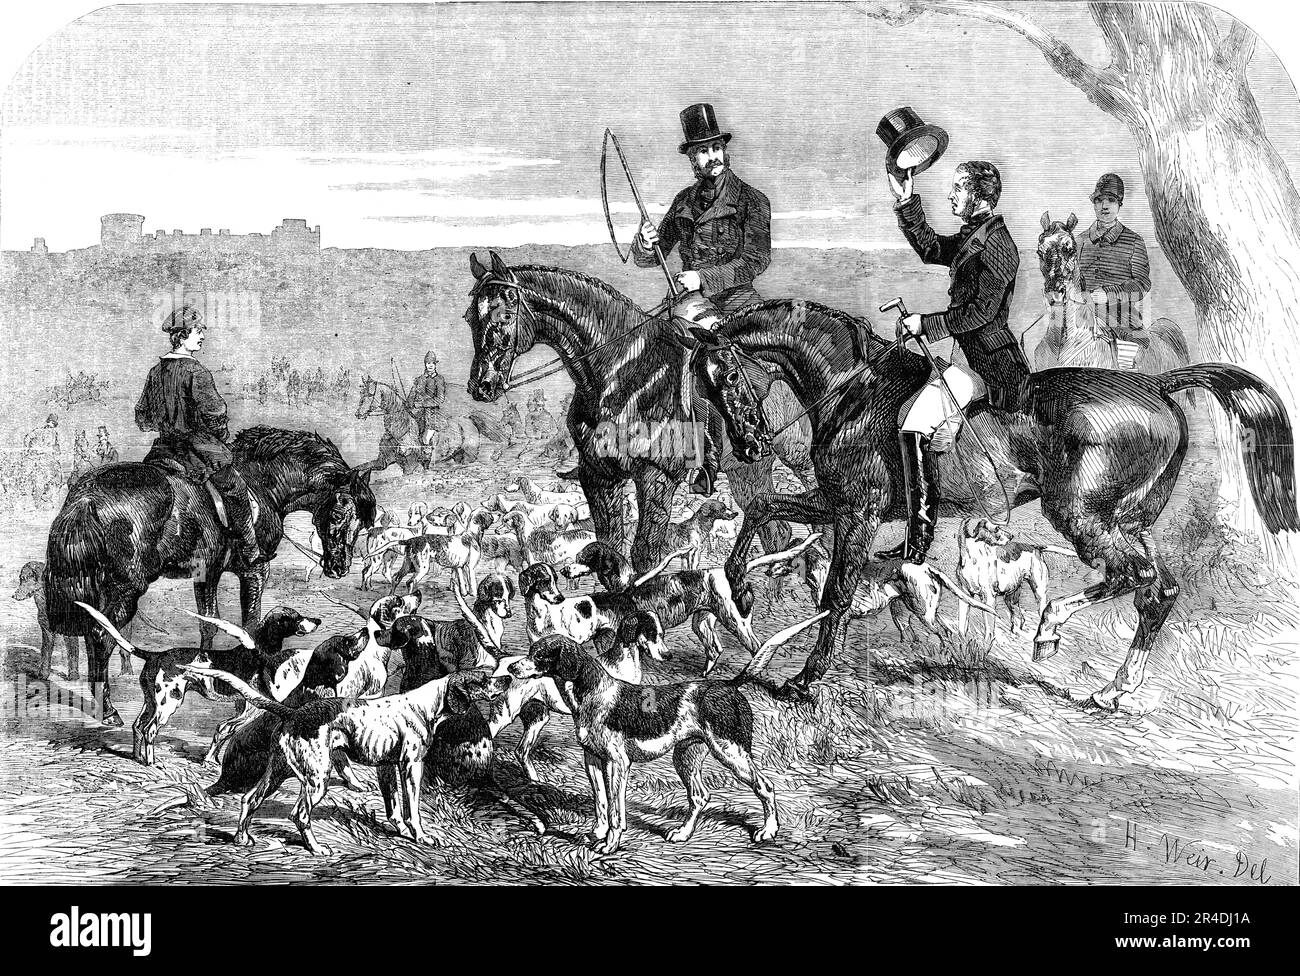 H.R.H. Prince Albert's Harriers, 1856. Hare-coursing in Berkshire. 'Prince Albert's harriers are in the strictest sense of the term a private pack, kept by his Royal Highness for his own amusement, under the management of Colonel Hood...The hounds were...of medium size, with considerable variety of true colours...we soon found a stout hare that gave us an opportunity of seeing and admiring the qualities of the pack... just as we were squaring our shoulders and settling down to take a very uncompromising hedge with evident signs of a broad ditch of running water on the other side, the hounds th Stock Photo